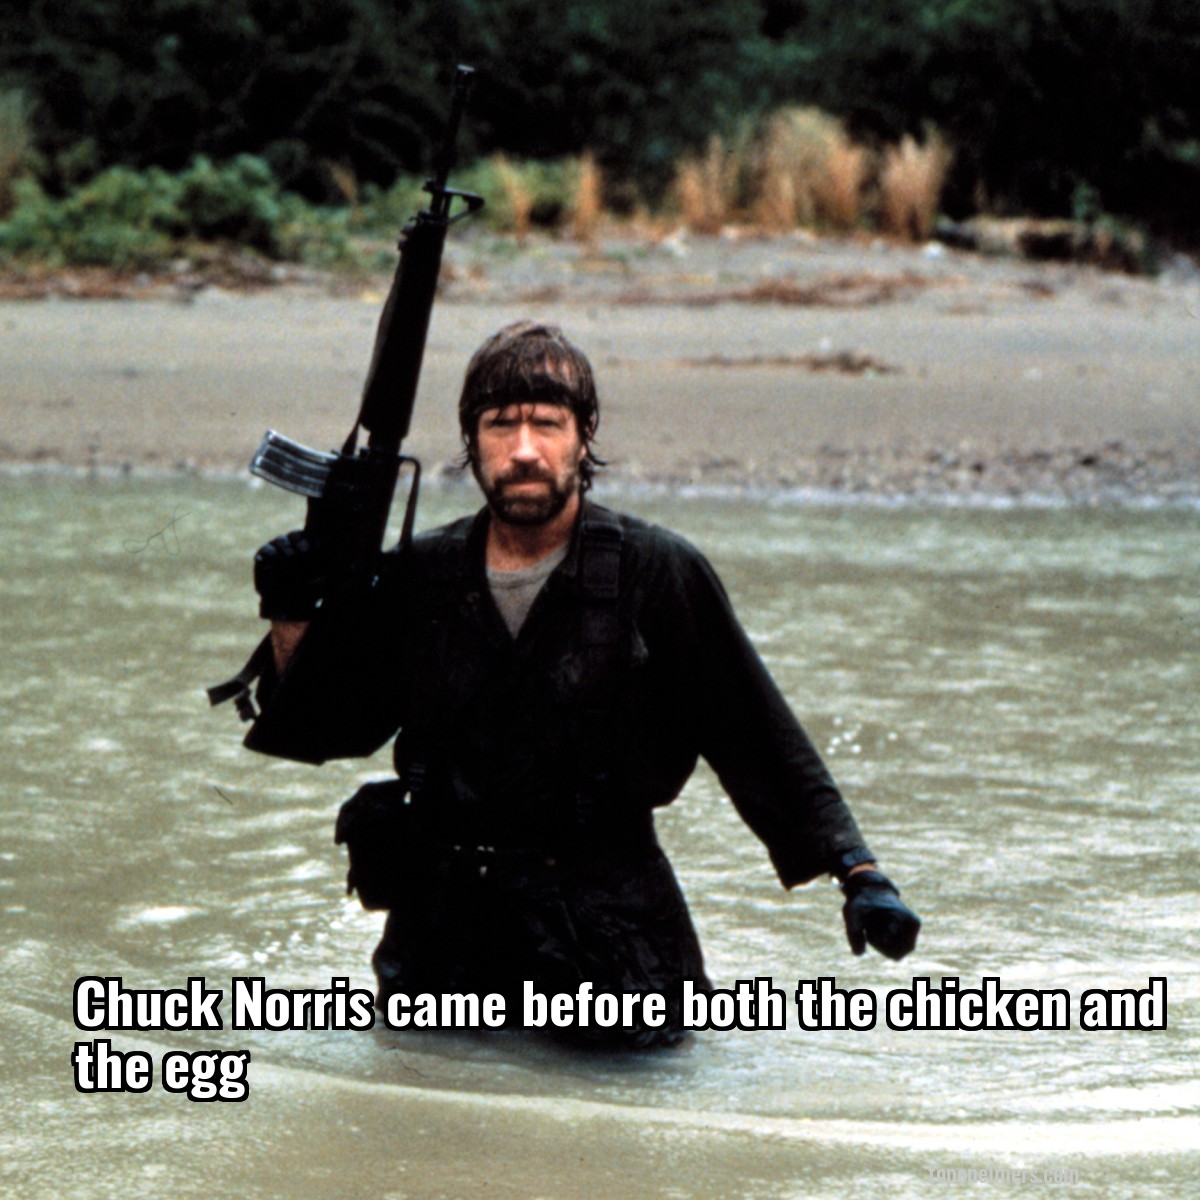 Chuck Norris came before both the chicken and the egg